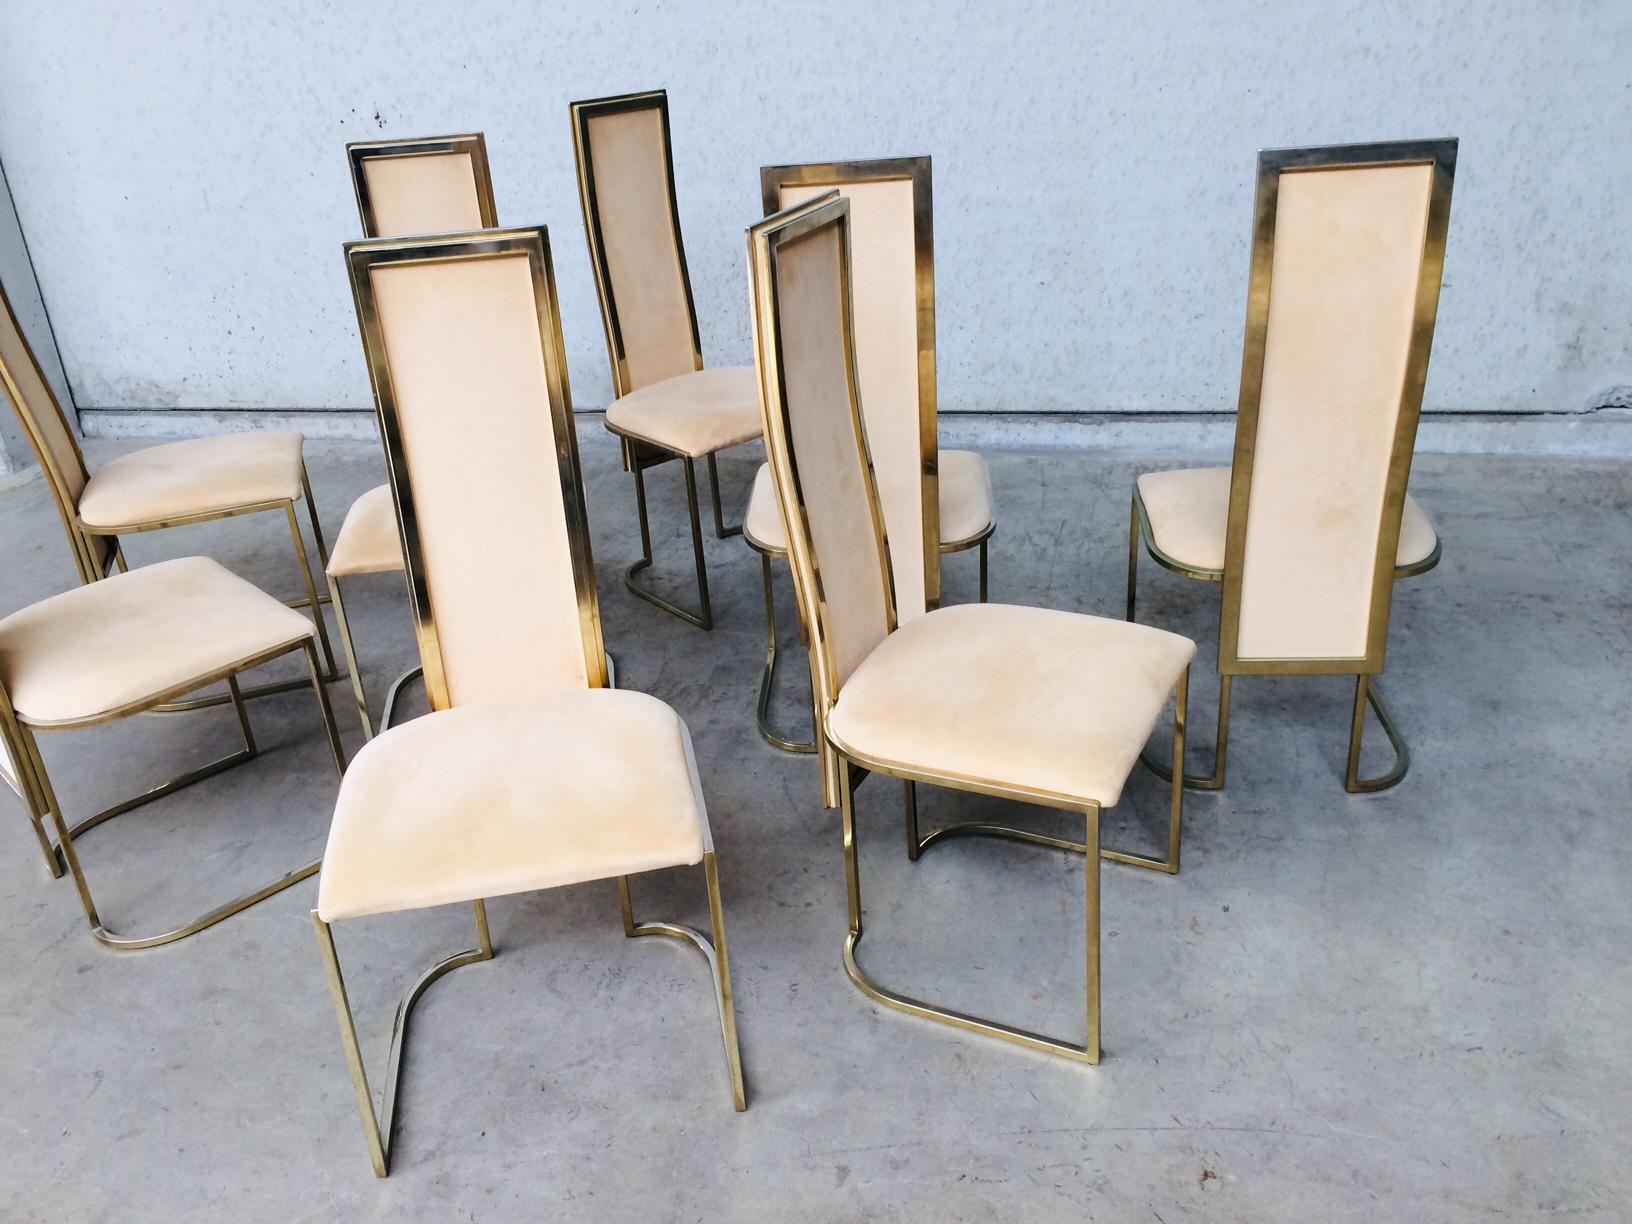 Metal Hollywood Regency Design Set of 8 Dining Chairs by Belgo Chrom, 1970's For Sale